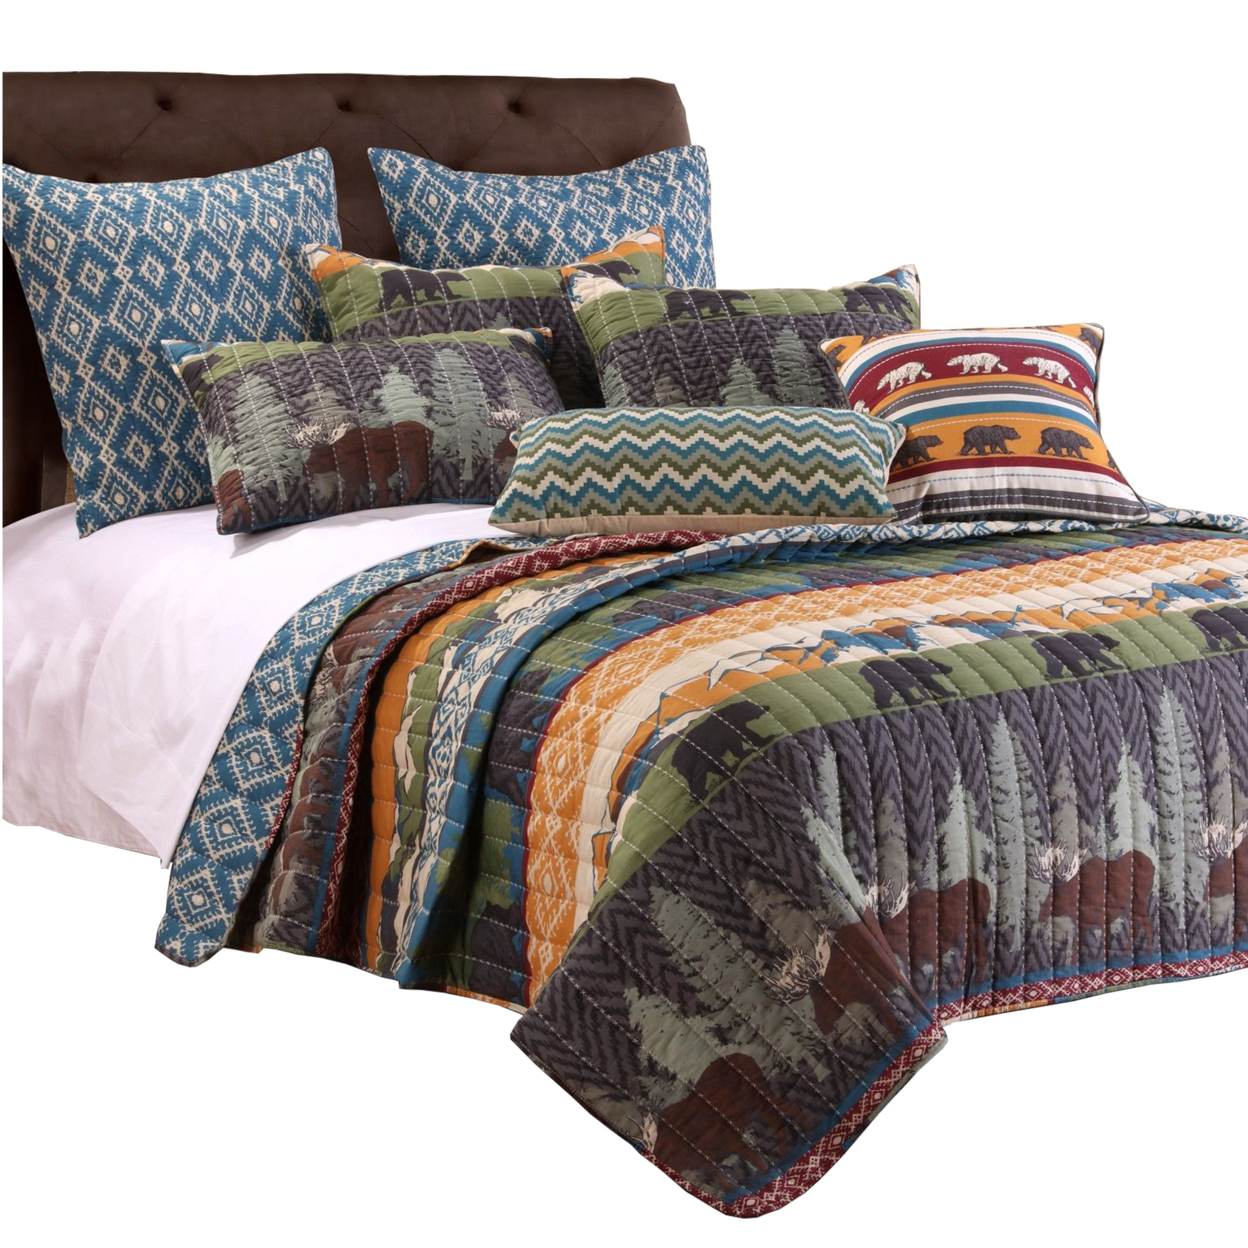 5 Piece King Size Quilt Set With Nature Inspired Print, Multicolor- Saltoro Sherpi